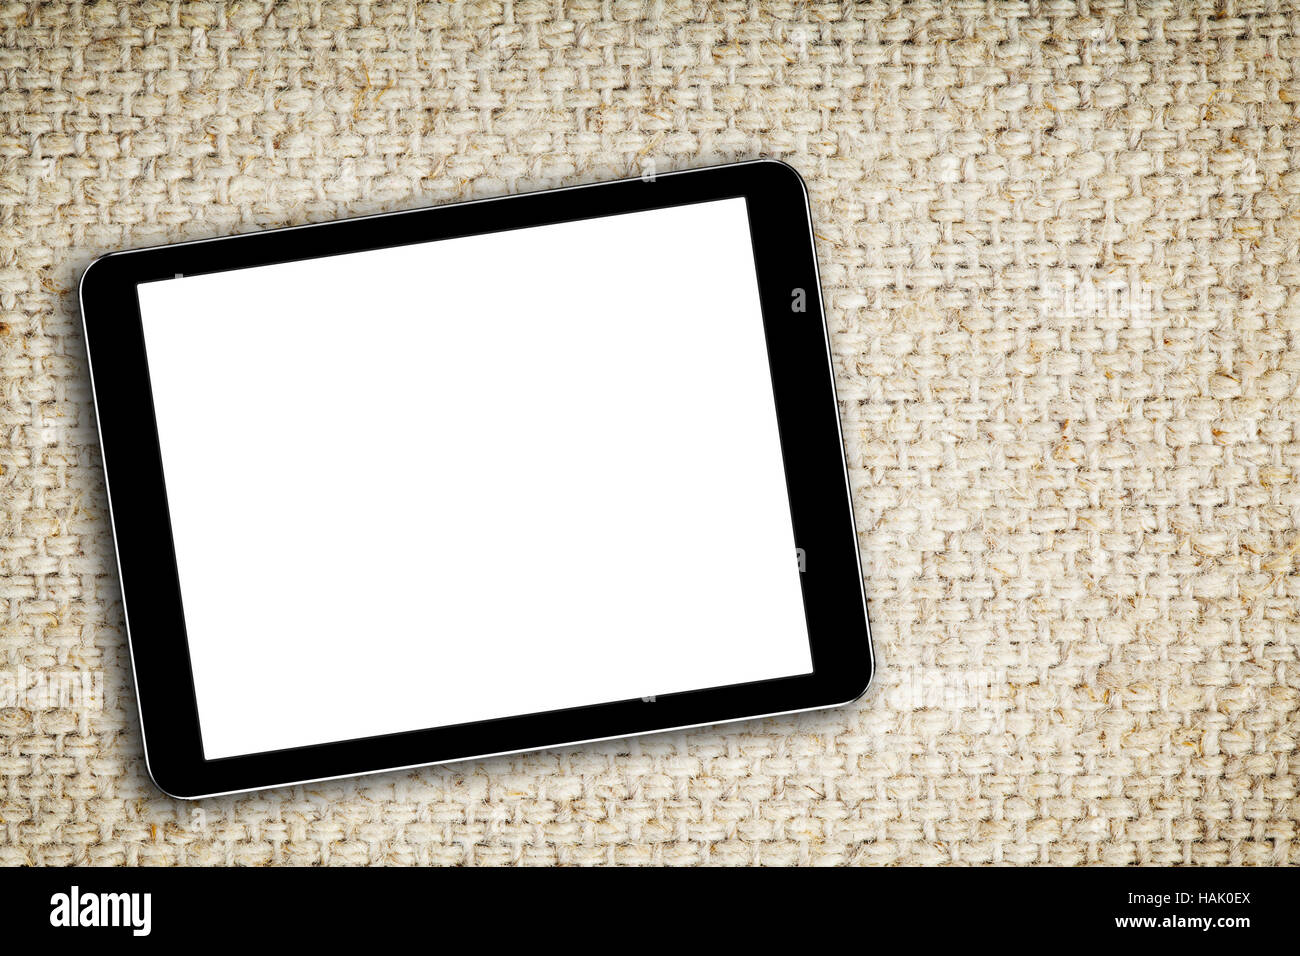 blank digital tablet on fabric background Stock Photo